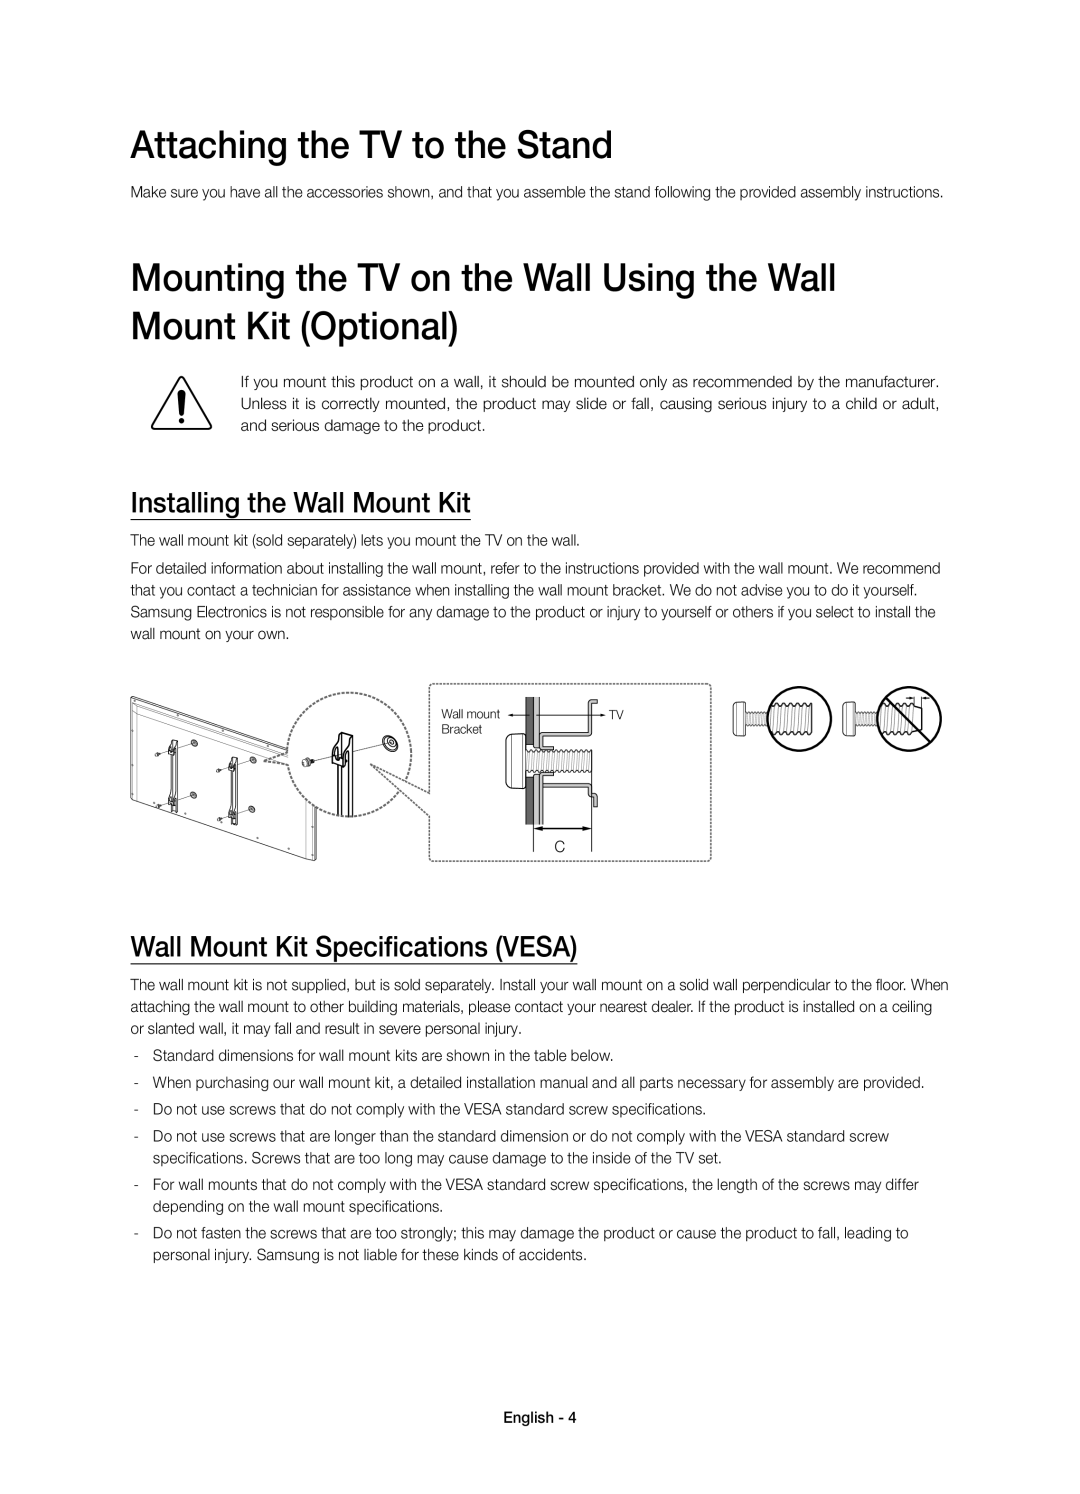 Samsung UE40H5373SSXZG manual Attaching the TV to the Stand, Mounting the TV on the Wall Using the Wall Mount Kit Optional 